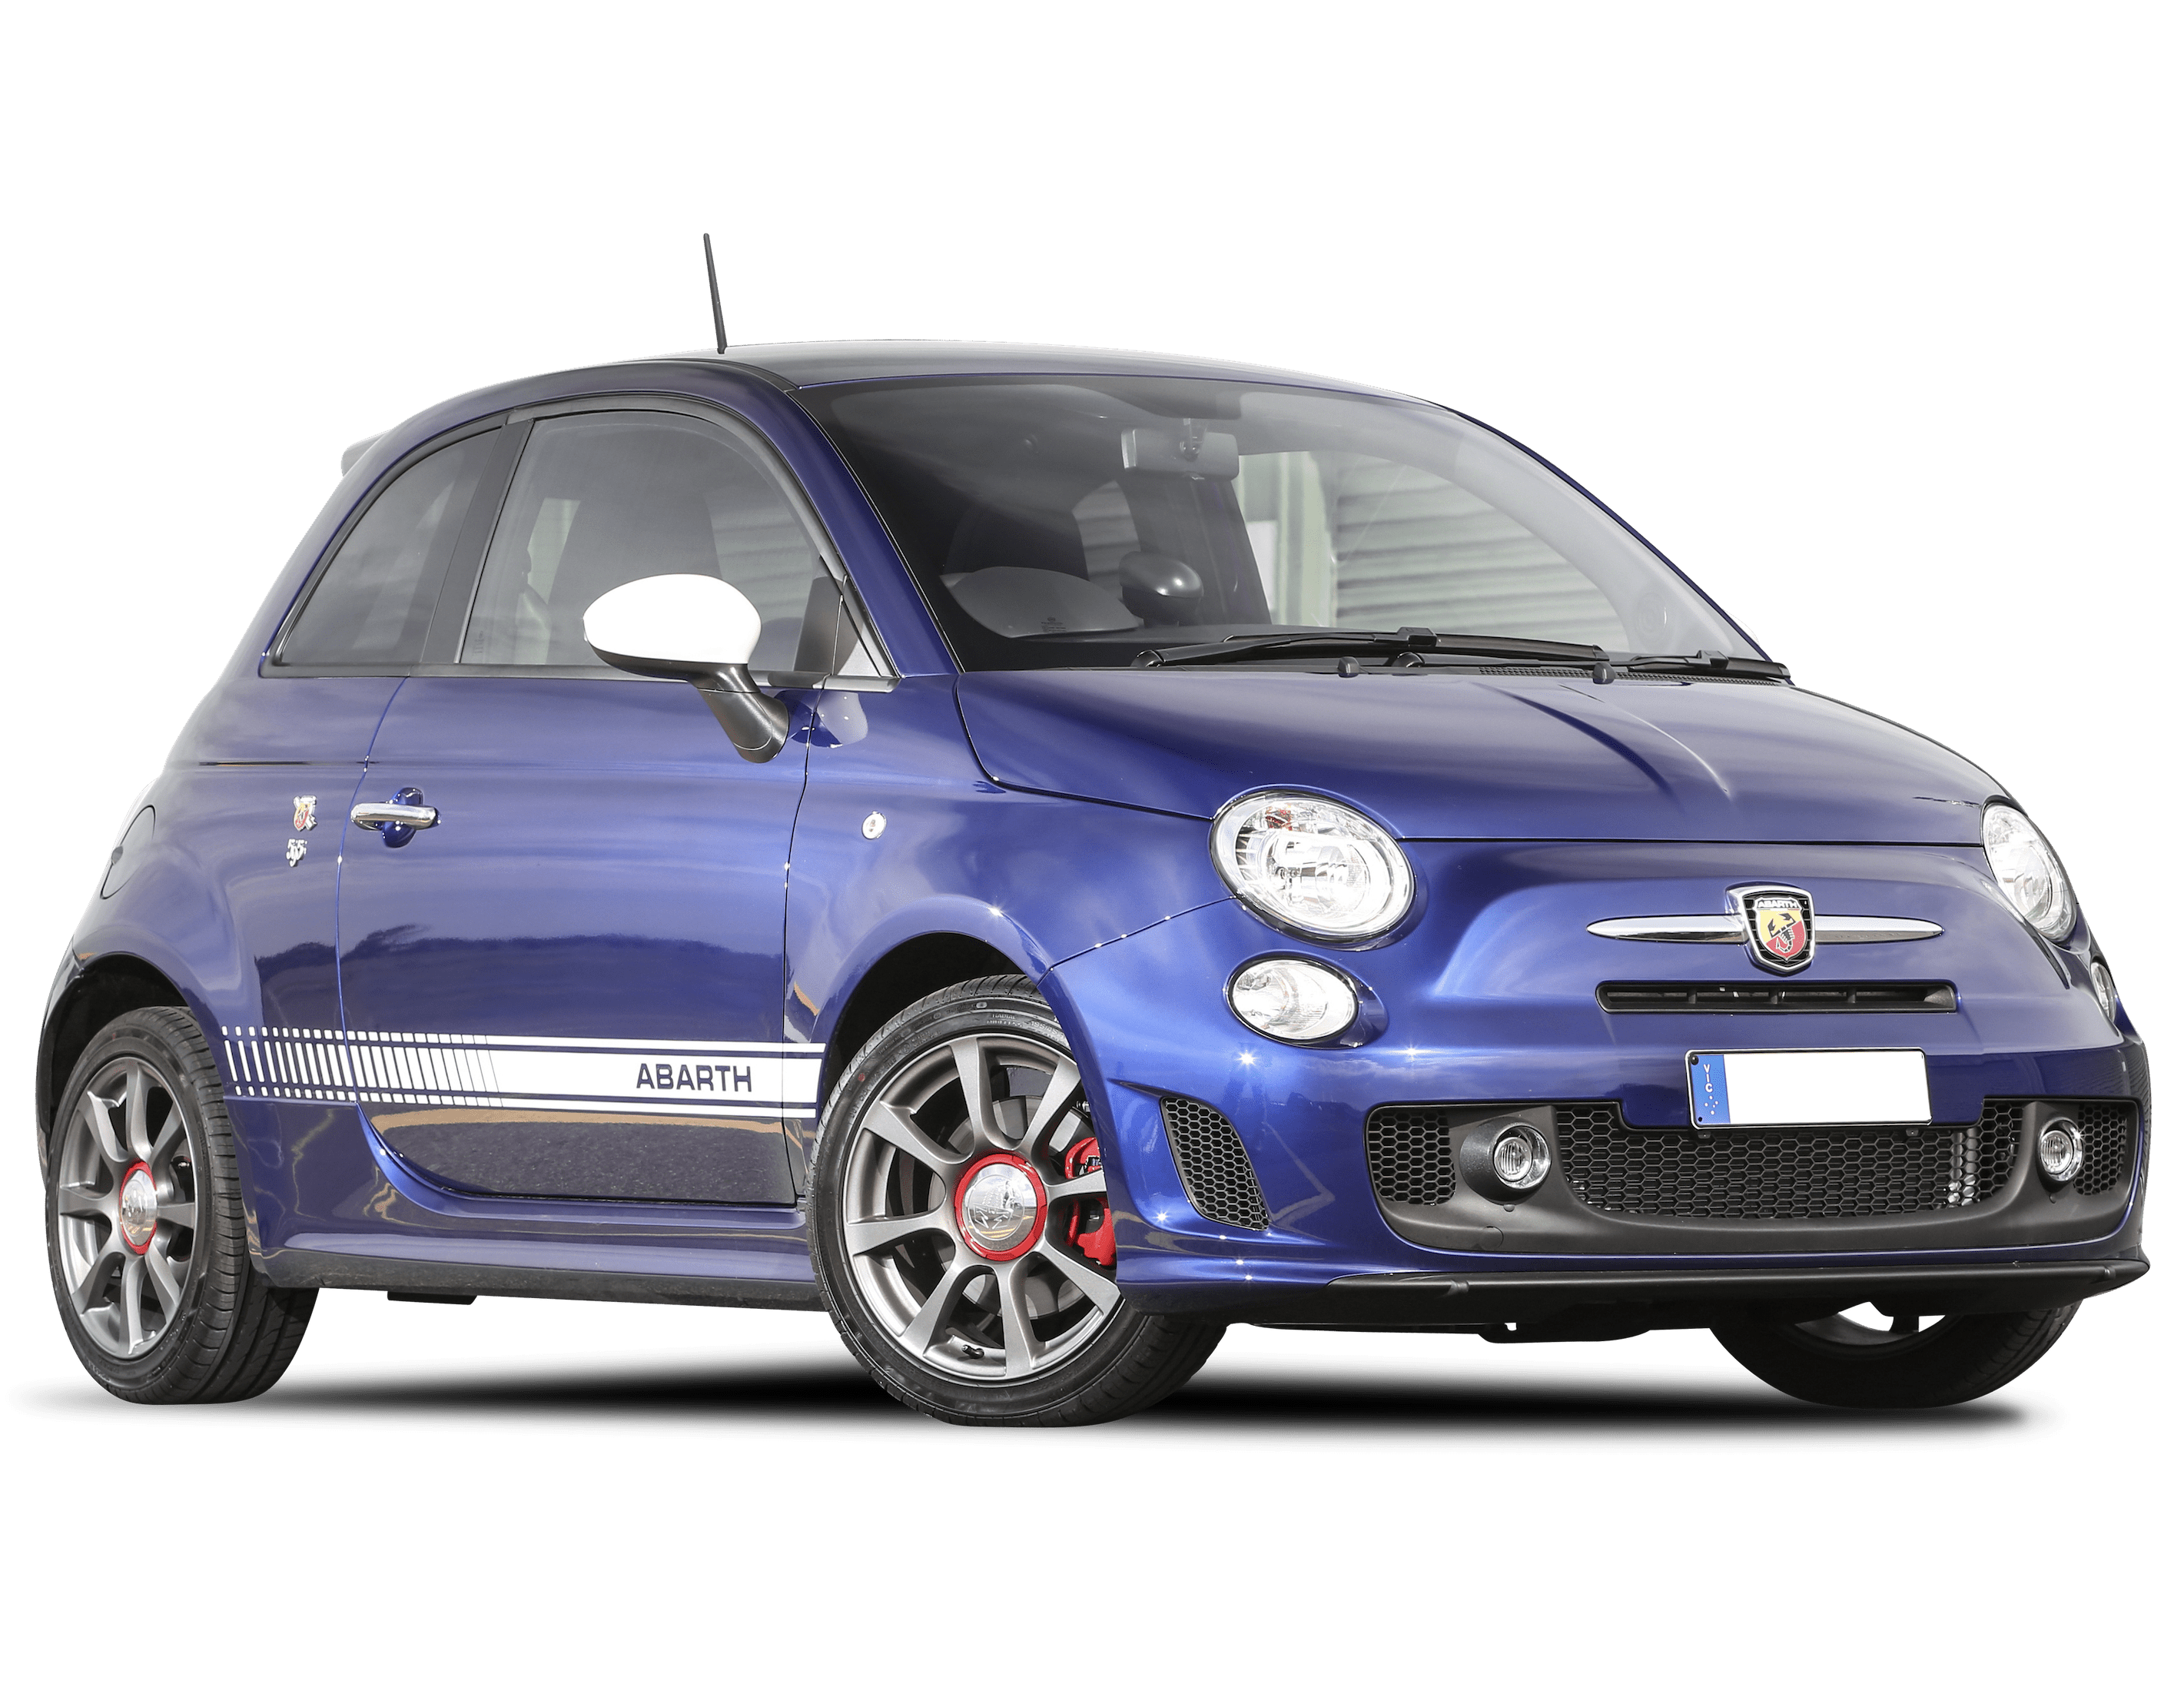 https://carsguide-res.cloudinary.com/image/upload/f_auto,fl_lossy,q_auto,t_default/v1/editorial/vhs/Abarth-595.png